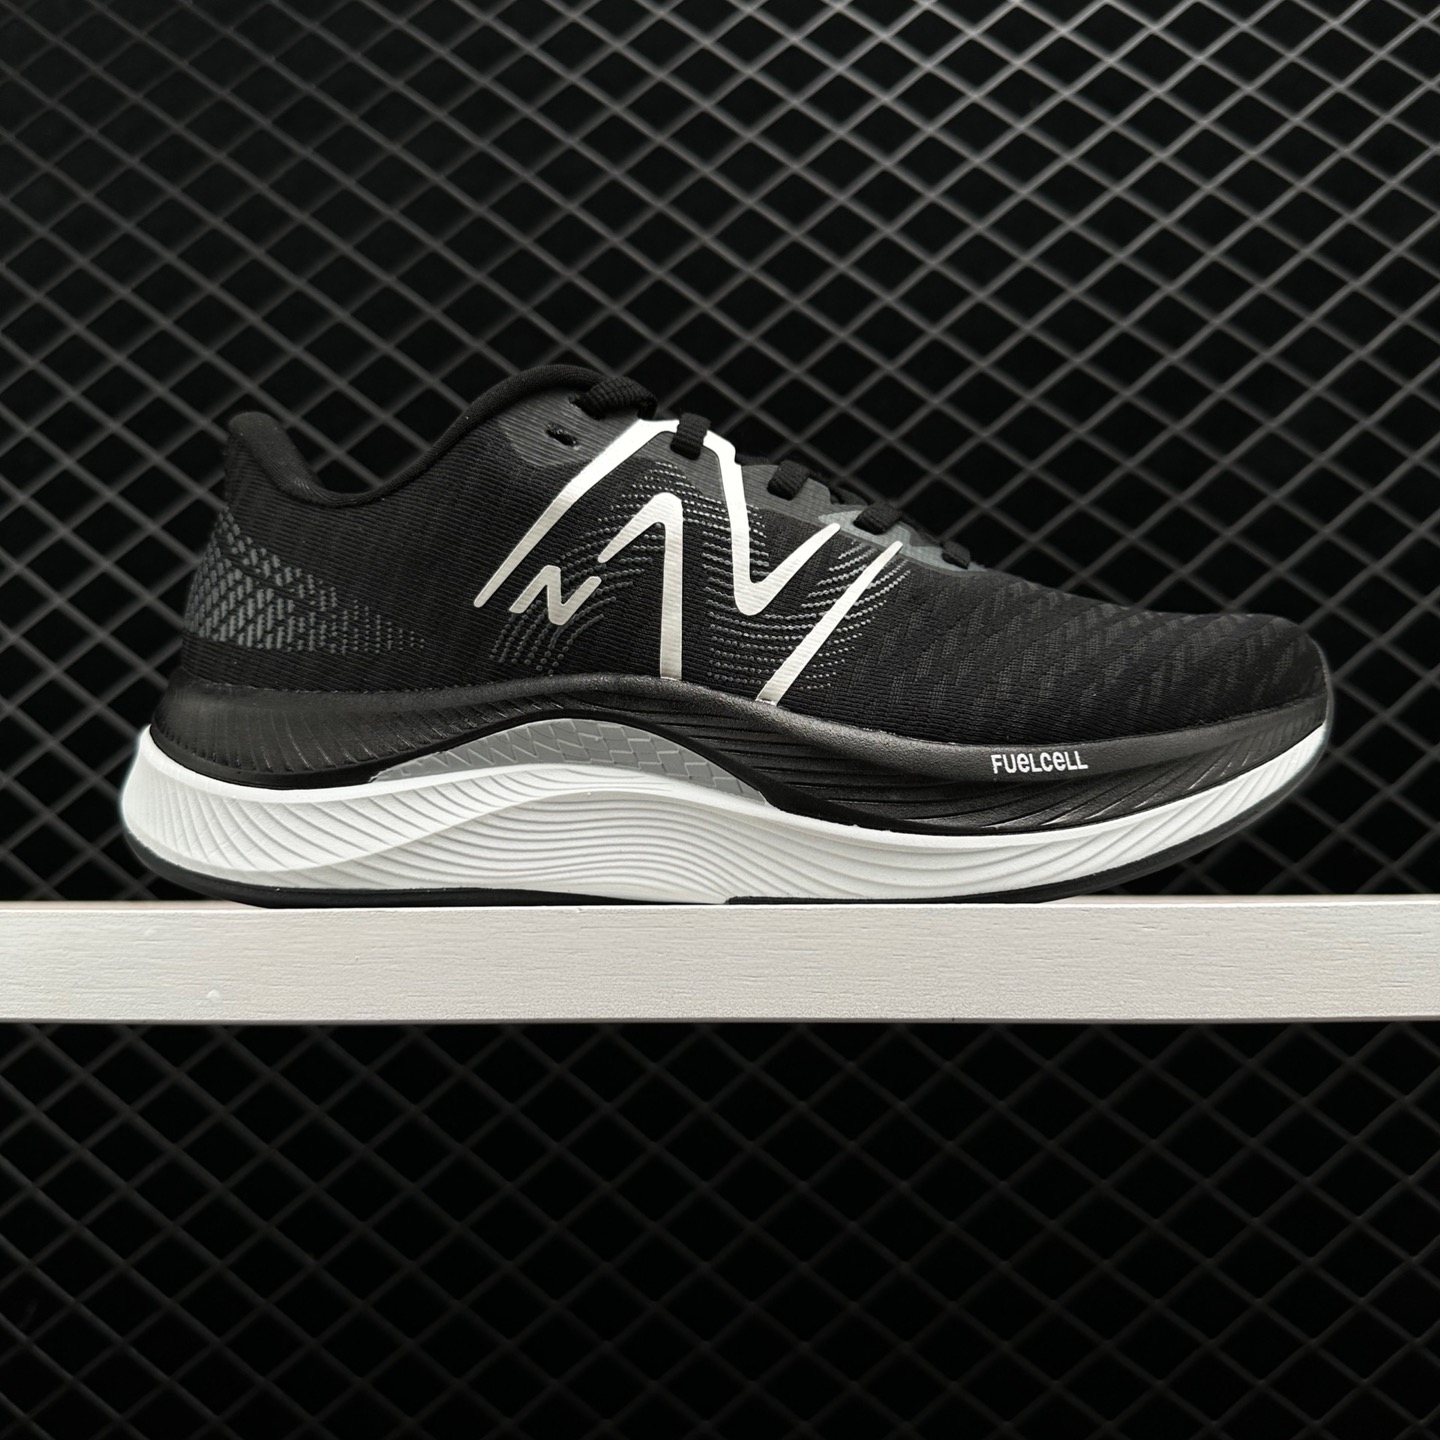 New Balance FuelCell Propel v4 Black White - Ultimate Performance Sneakers